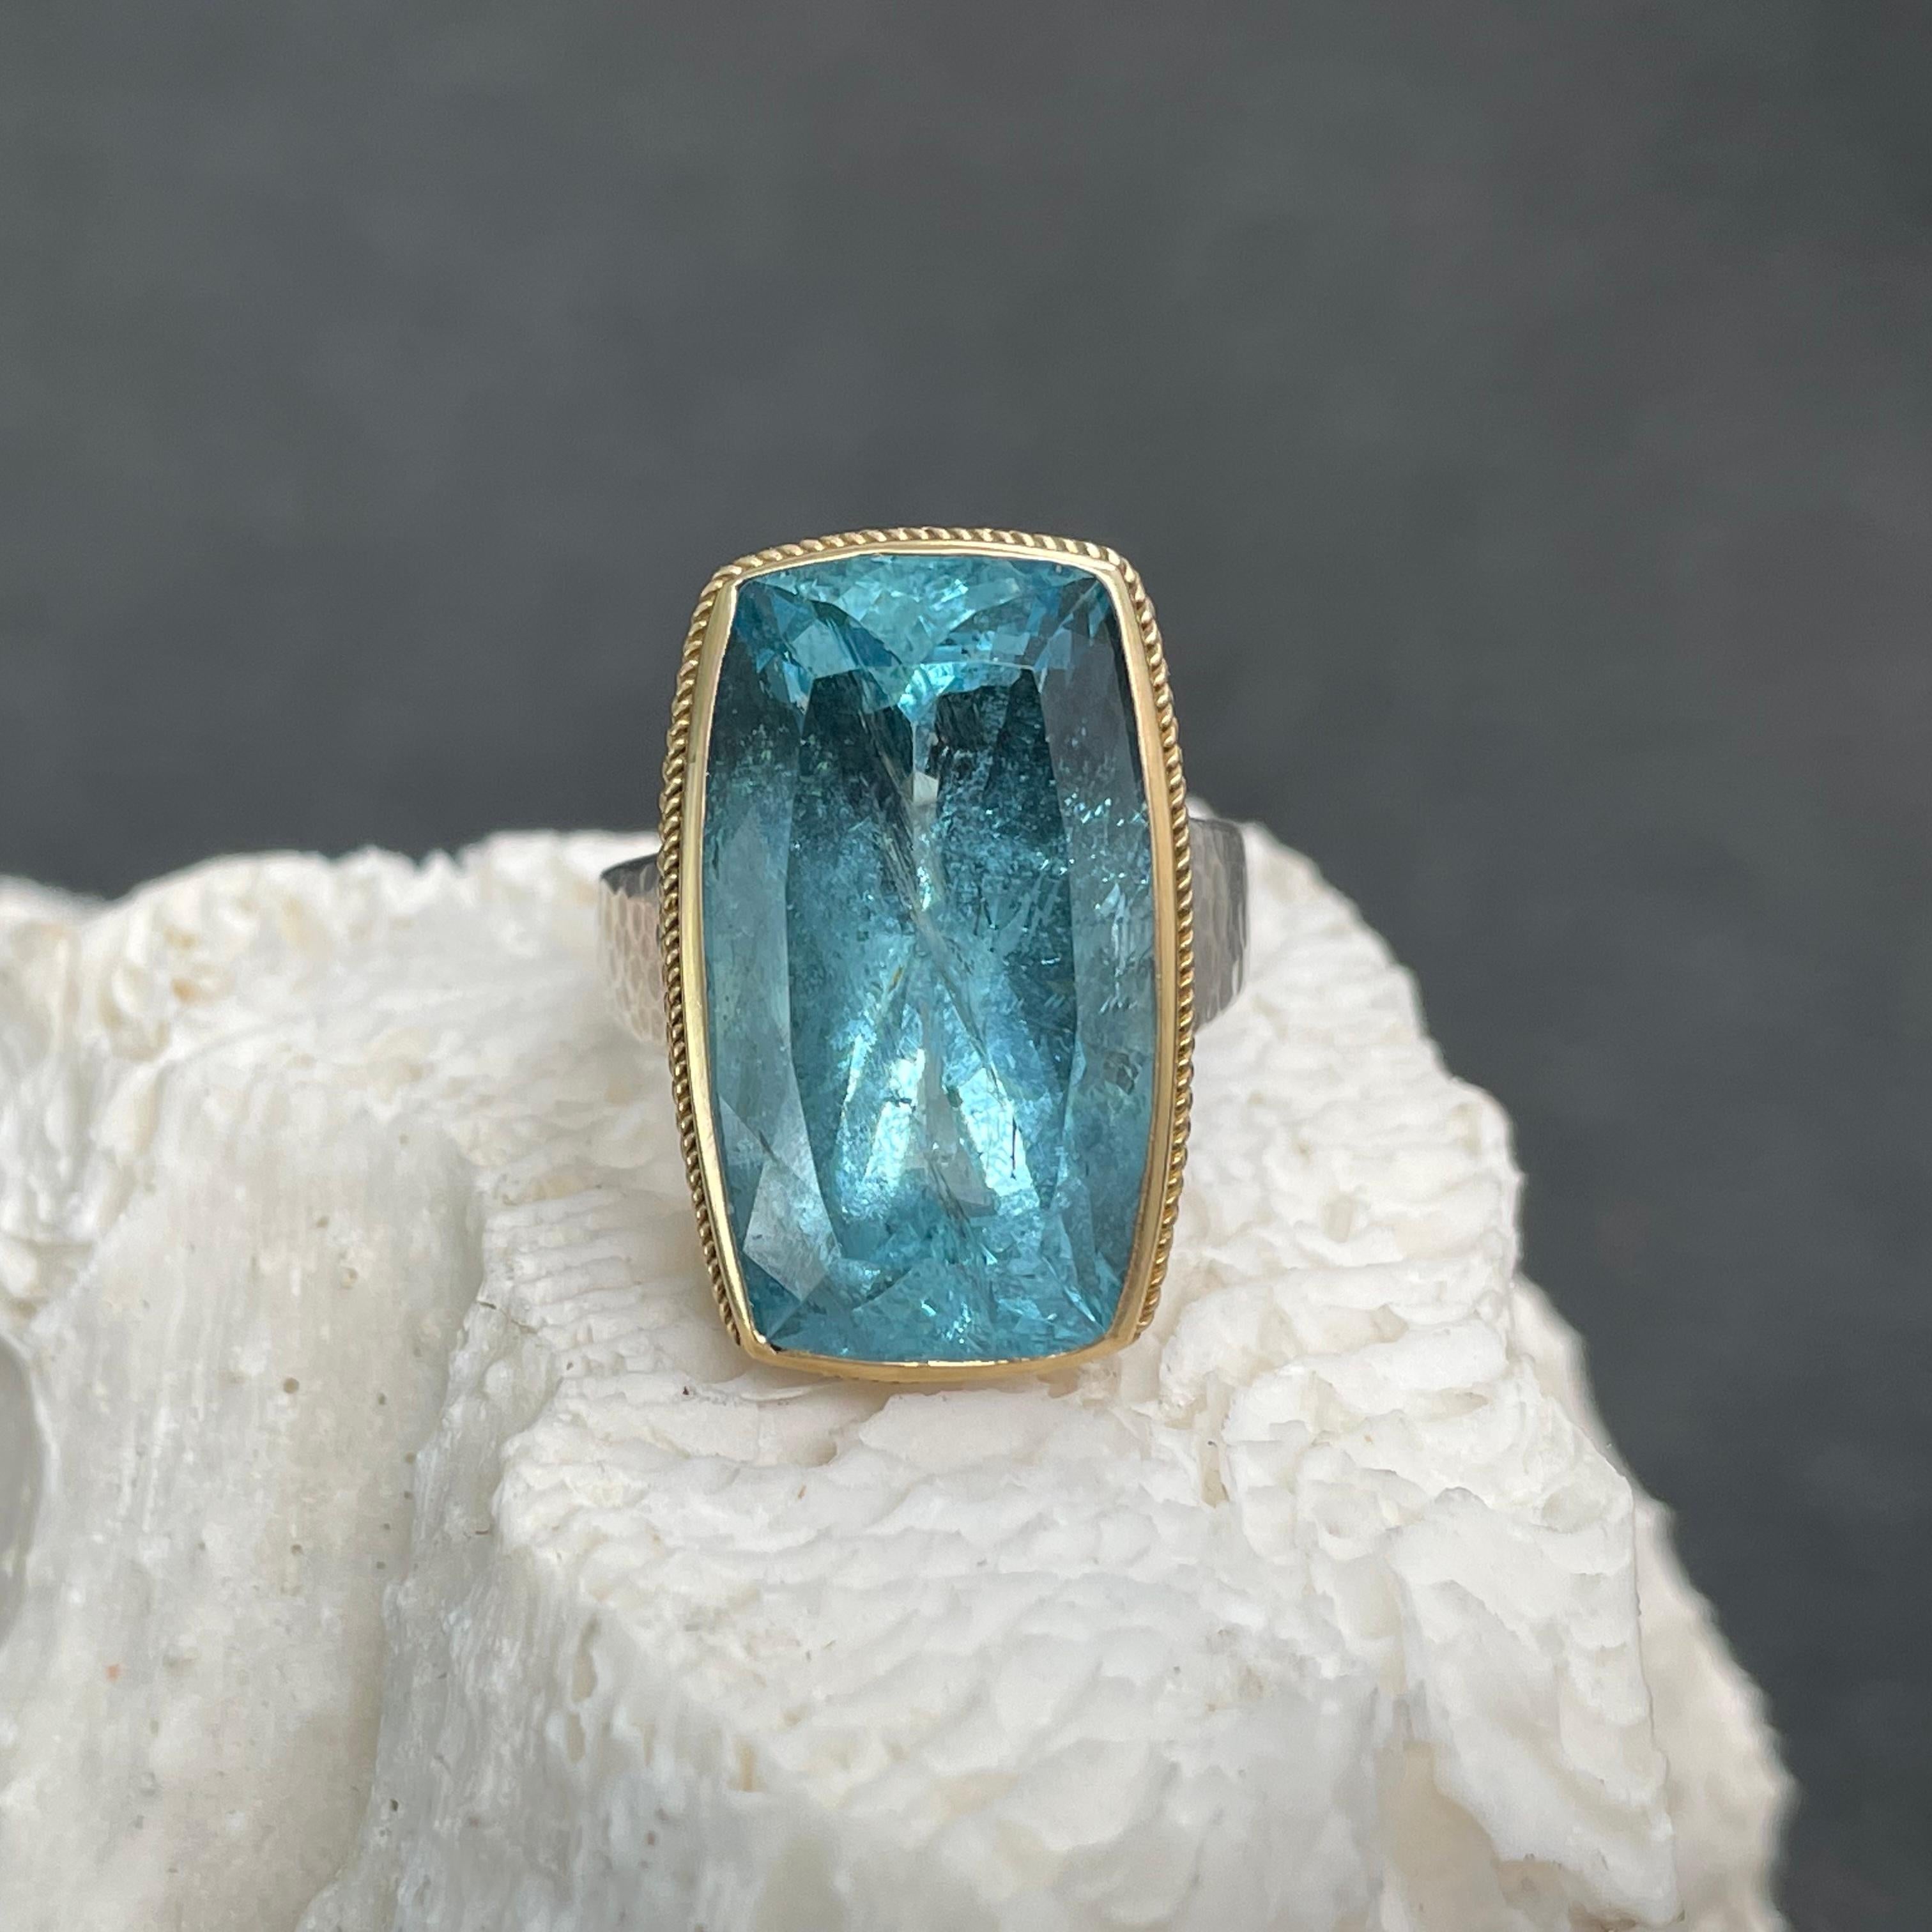 A deep color 10 x 14 mm long cushion shaped faceted Brazilian aquamarine is held in an 18K gold  